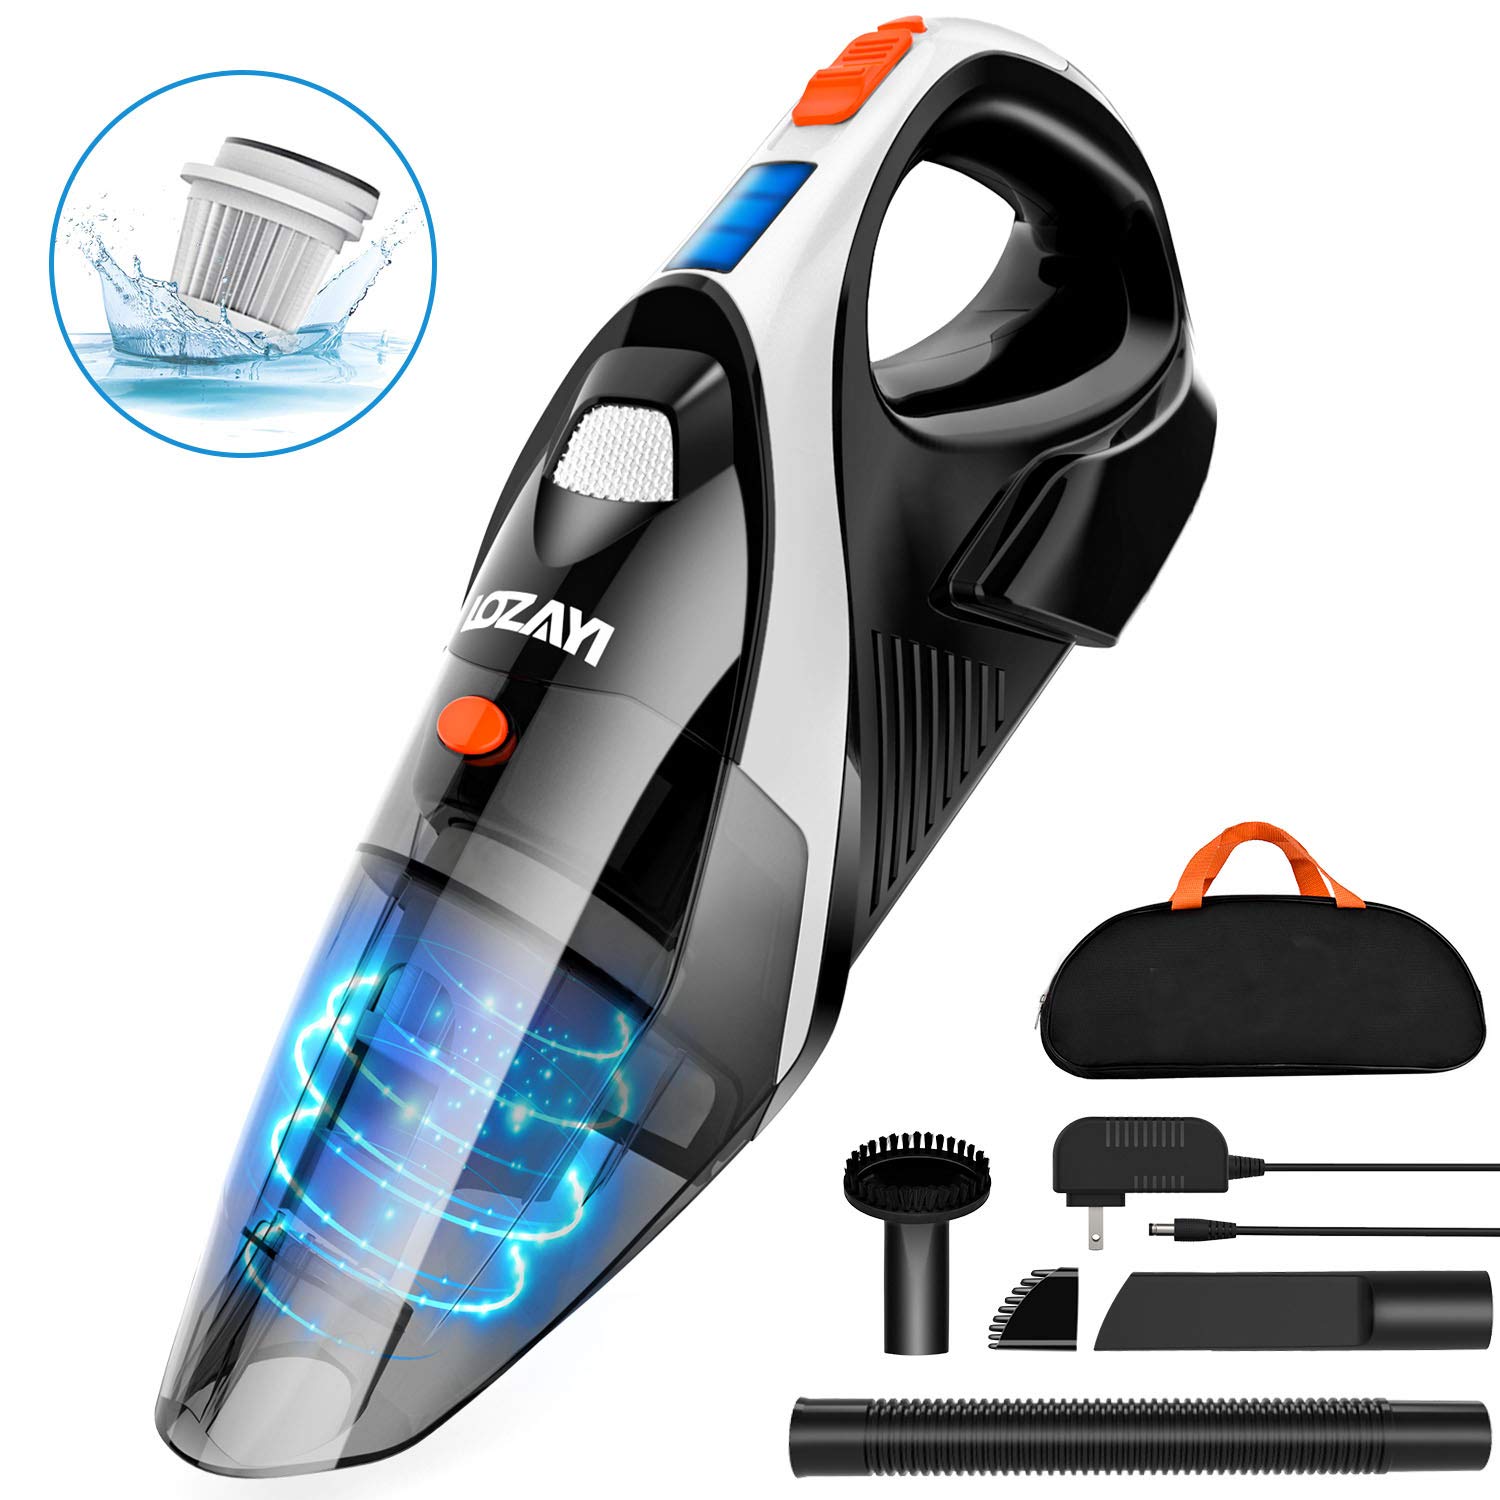 Book Cover Handheld Vacuum, LOZAYI 7KPA Cordless Vacuum Cleaner Rechargeable Hand Vac, LED Light 100W Stronger Cyclonic Suction Lightweight Wet/Dry Handheld Vacuum Cleaner for Home Pet Hair Car Cleaning-Orange